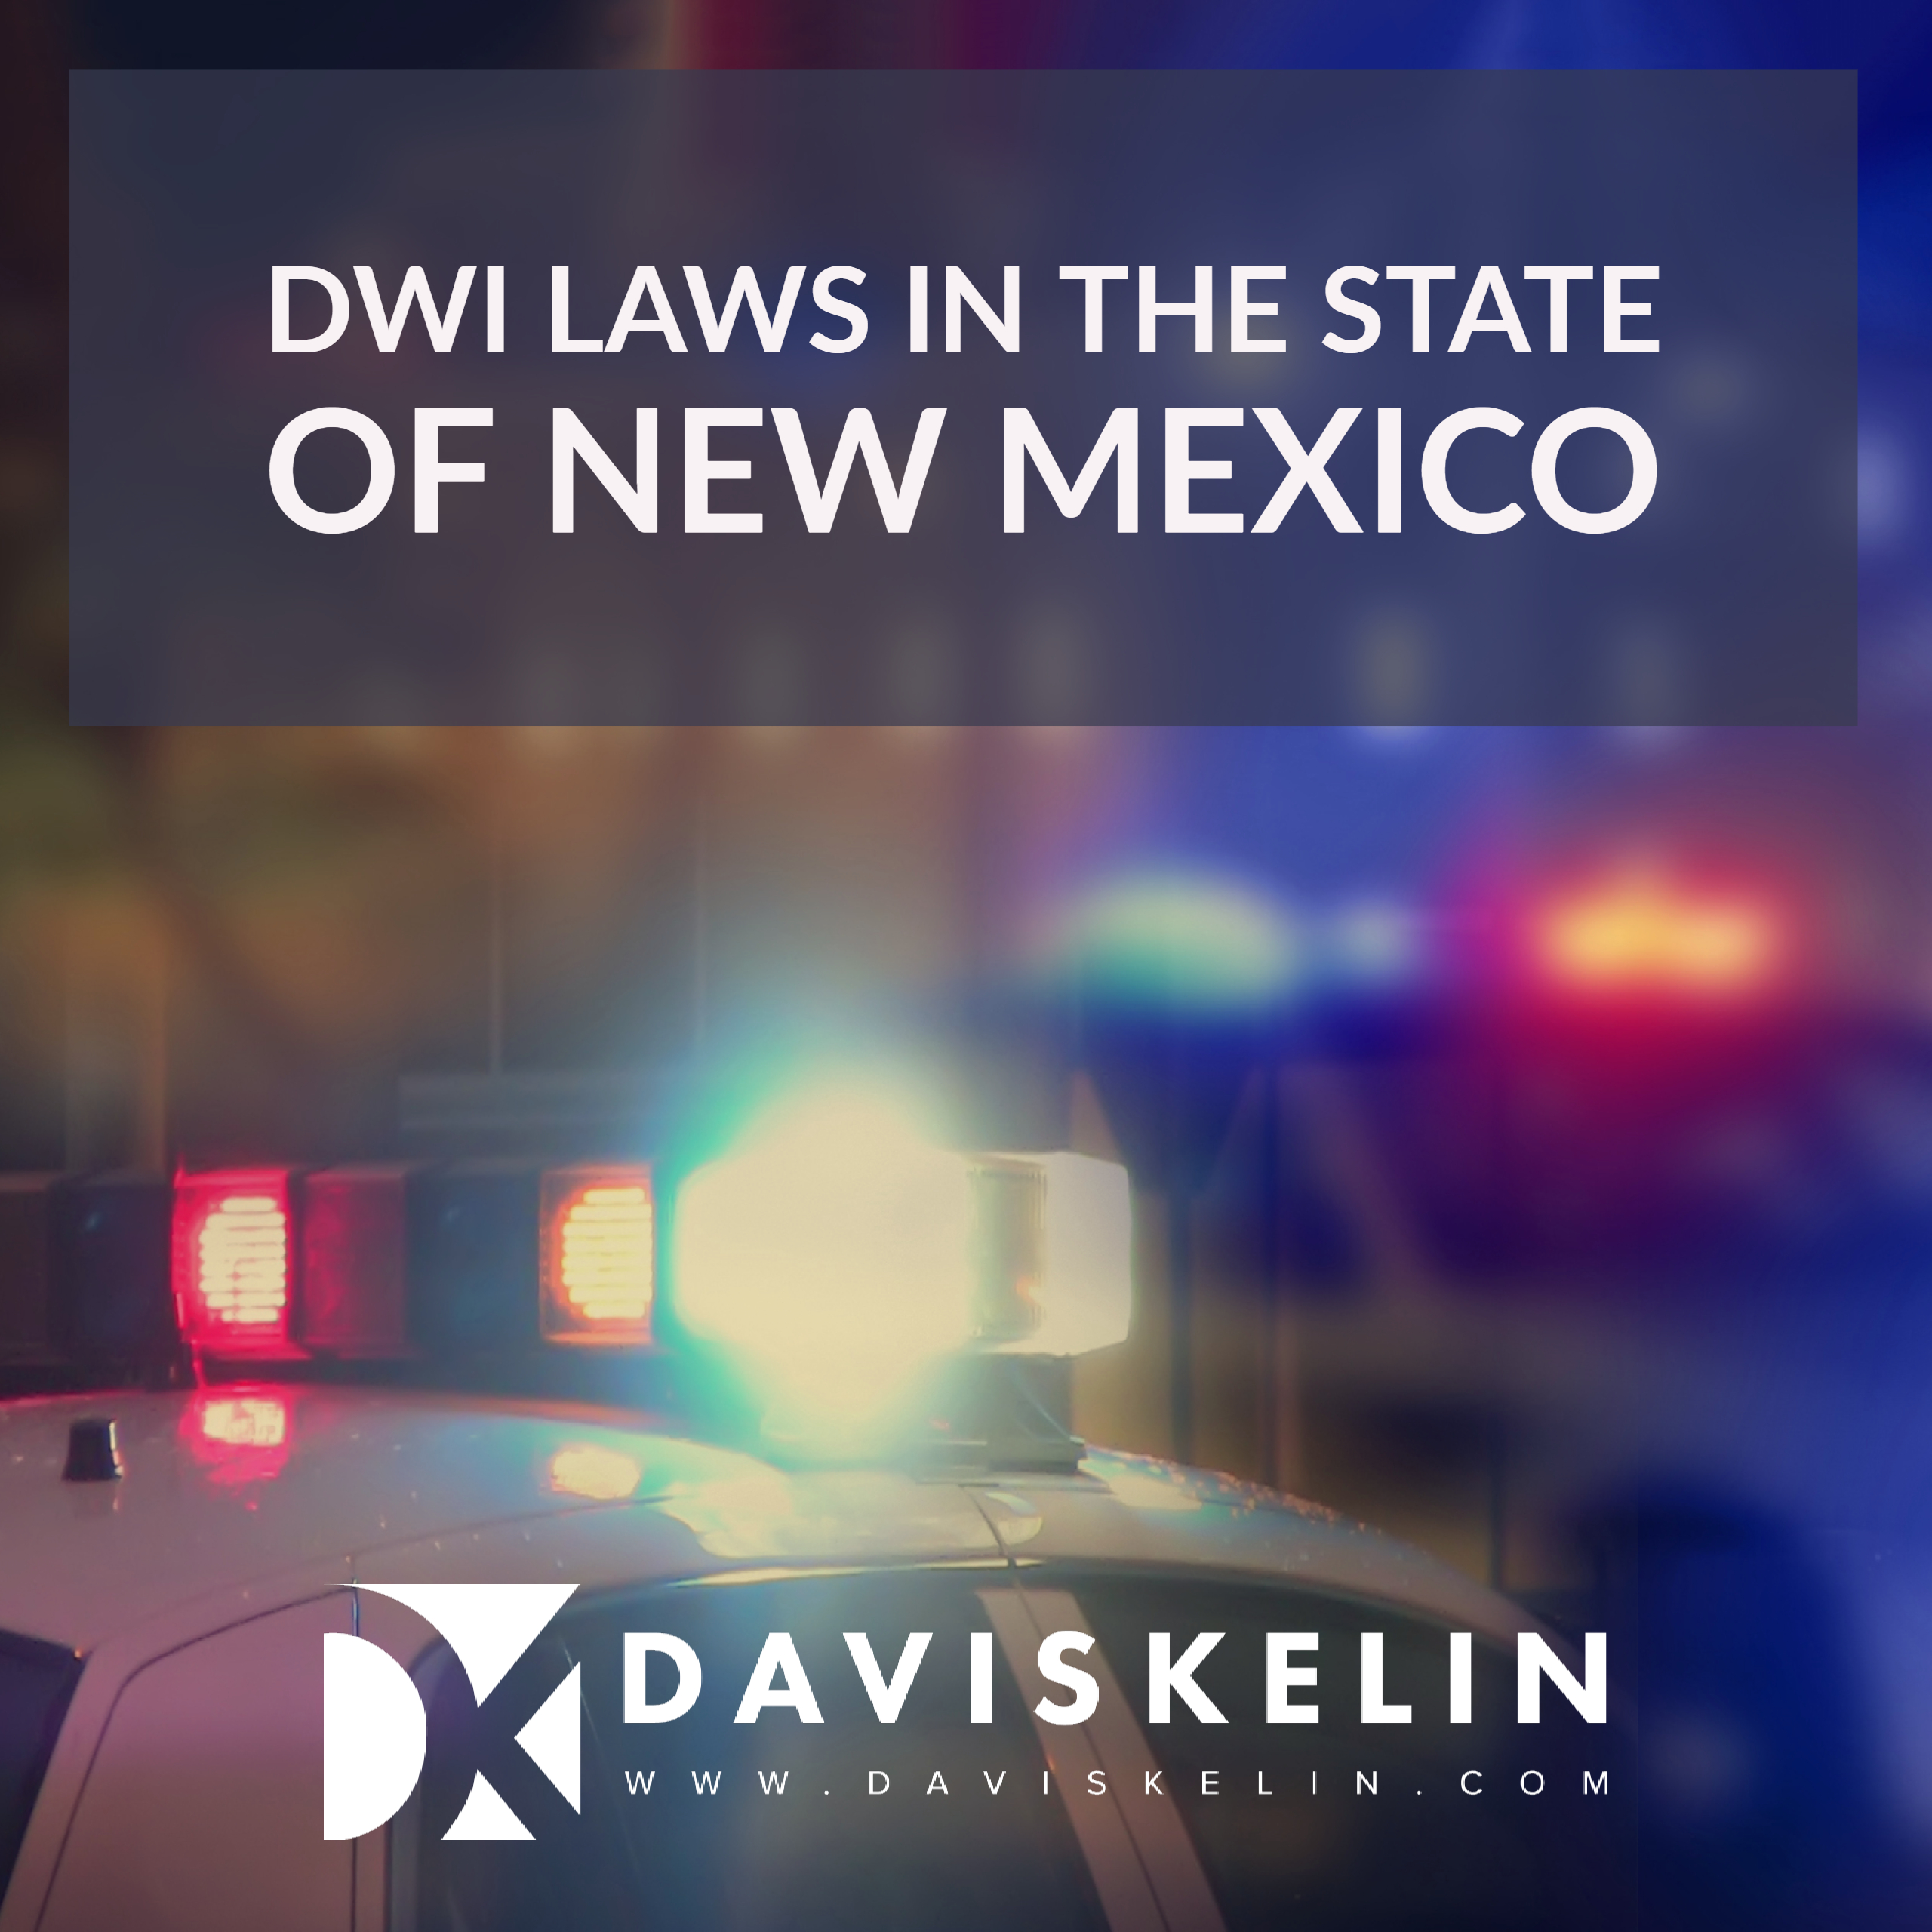 DWI Laws In The State of New Mexico